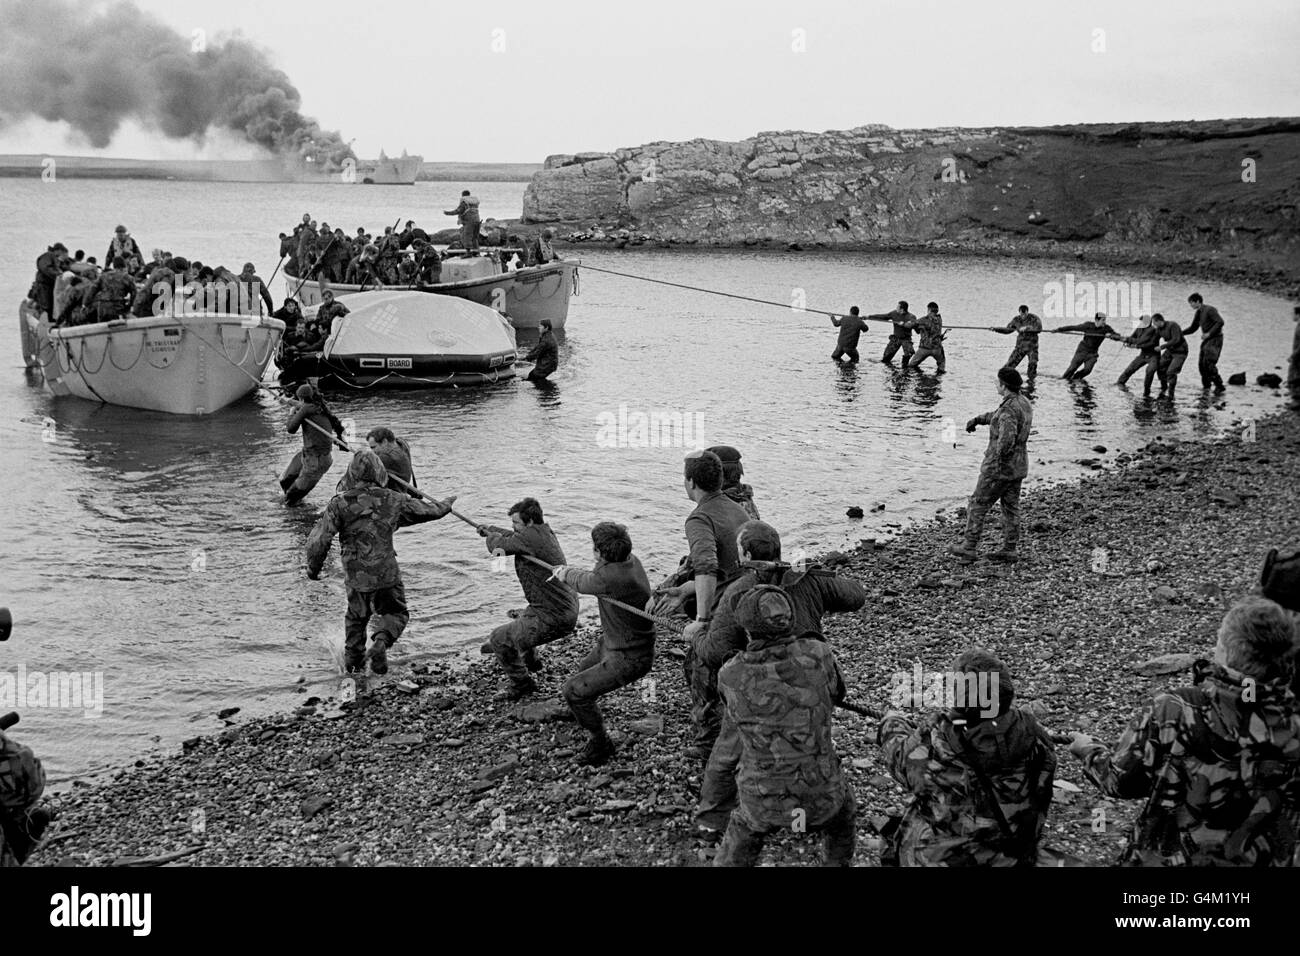 2ND APRIL: On this day in 1982 Argentina invaded the Falkland Islands. THE FALKLANDS WAR: RAF Sir Galahad (smoking in the background) survivors are hauled ashore by colleagues at Bluff Cove, East Falkland, after the Argentinian air attack during the Falklands conflict. The ship was eventually towed out to sea and sunk as a war grave. Stock Photo